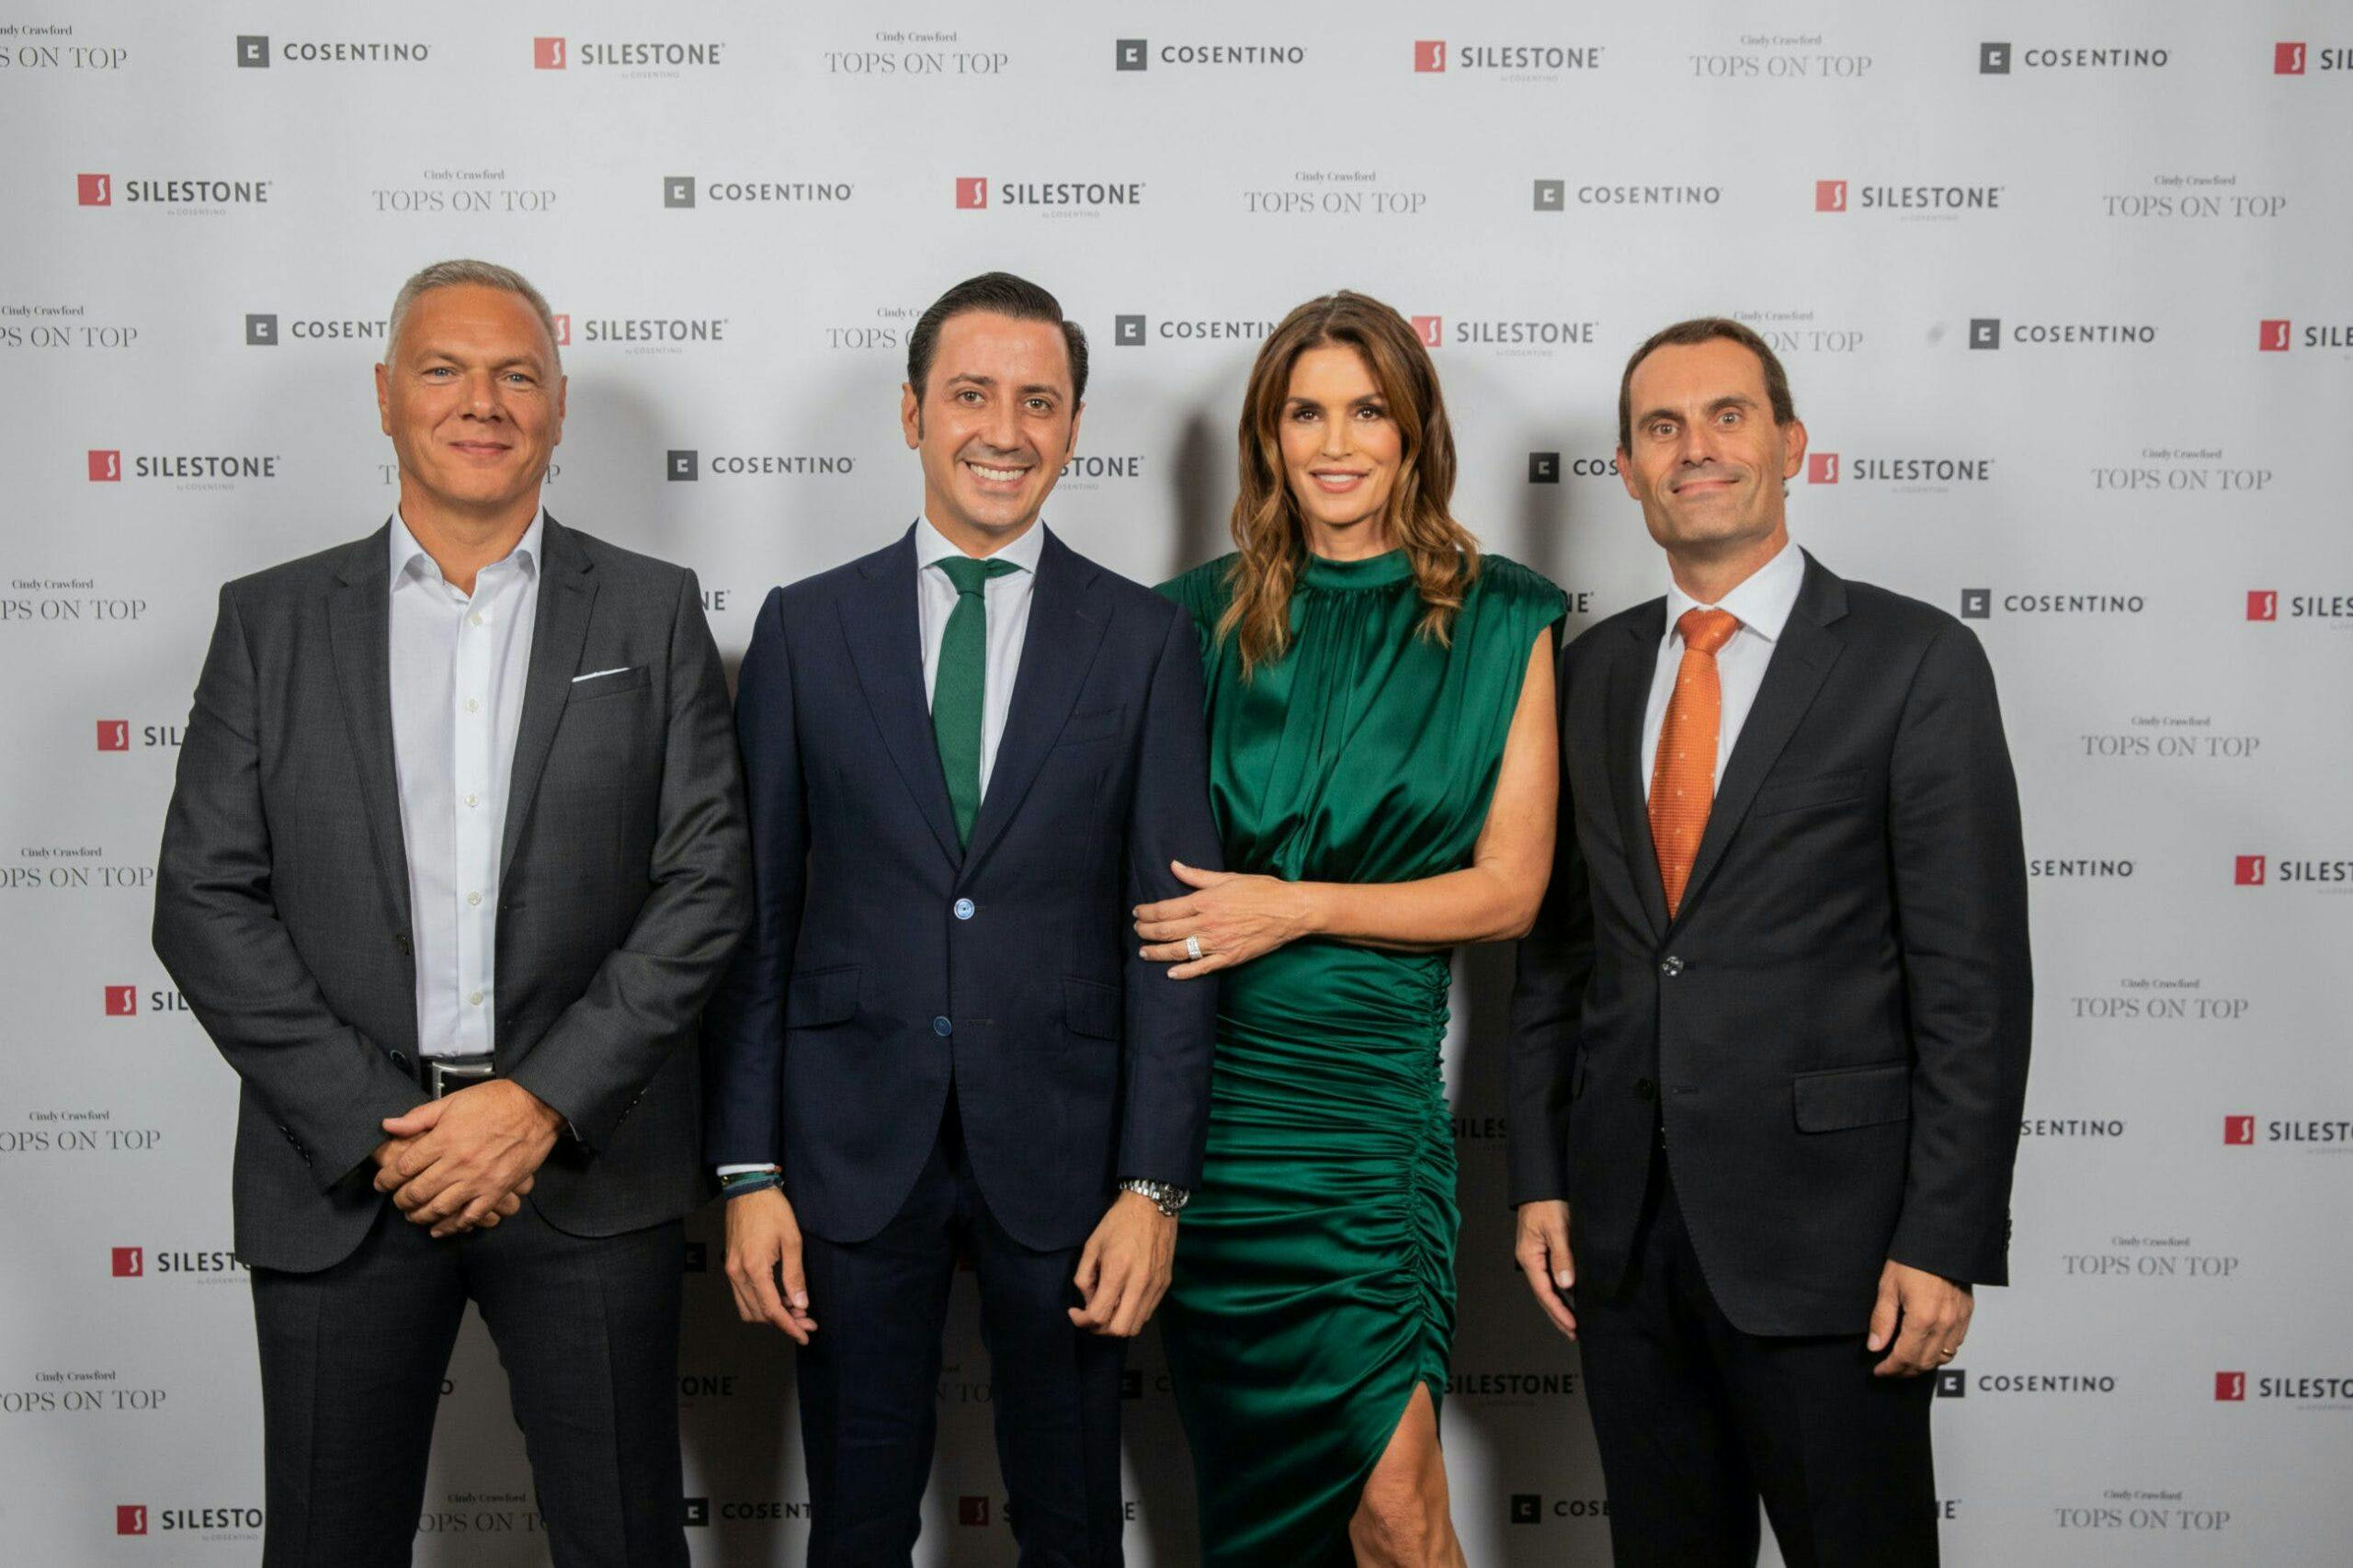 Image 34 of Paul Gidley Eduardo Cosentino Cindy Crawford Pedro Parra 3 scaled in Silestone® Presents its New "Tops on Top 2019" Campaign Featuring Cindy Crawford - Cosentino